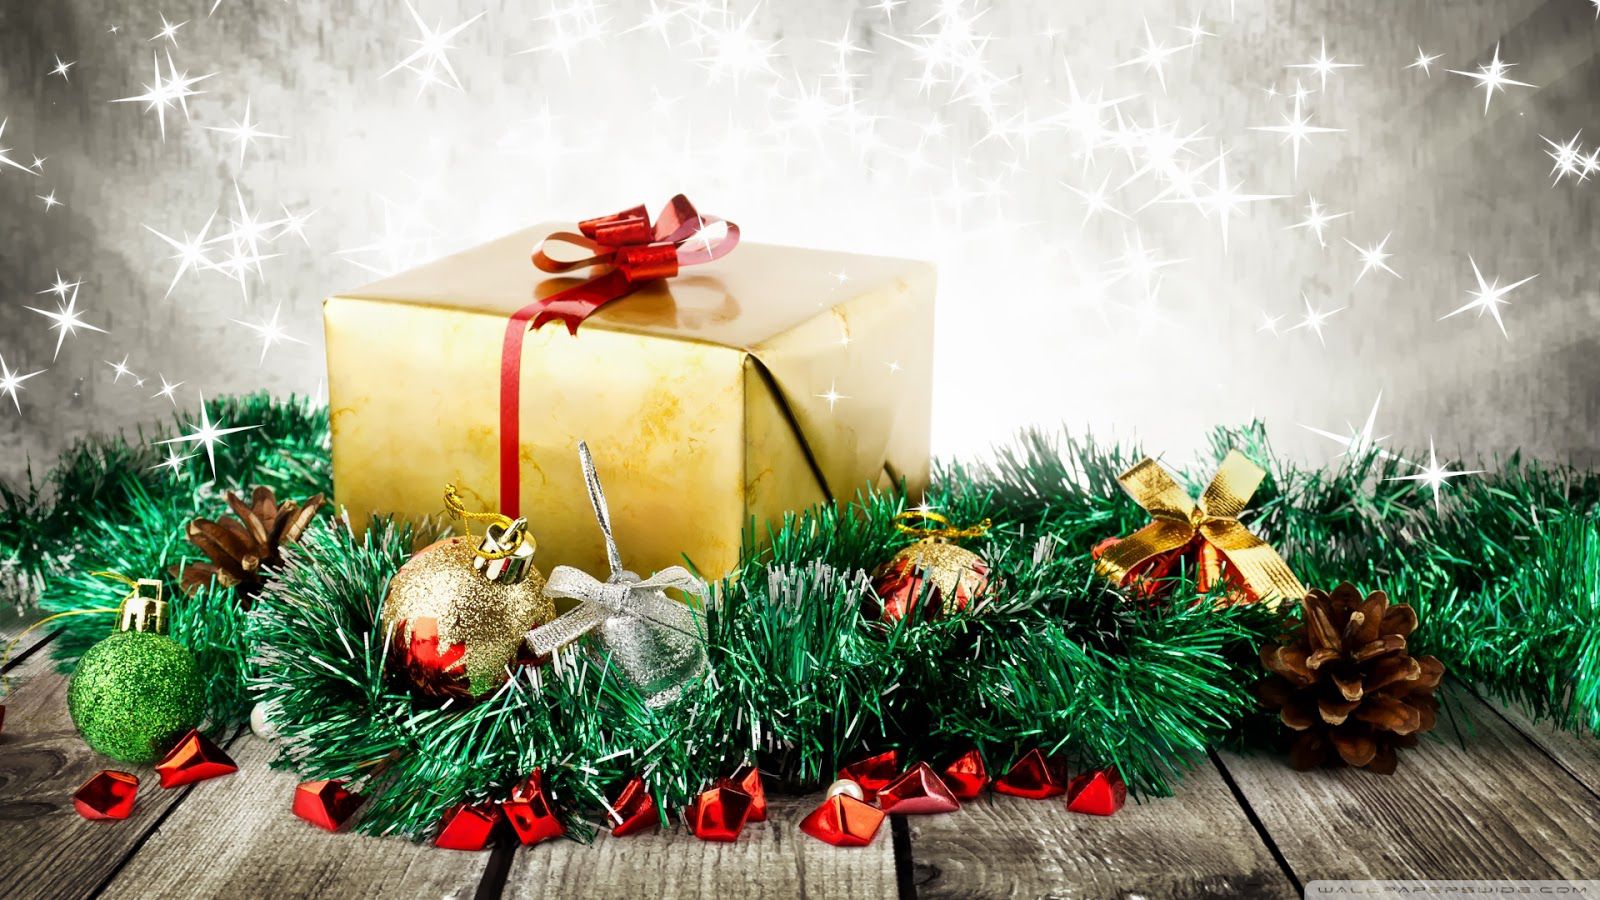 wrapped_christmas_present-wallpaper-1920x1080